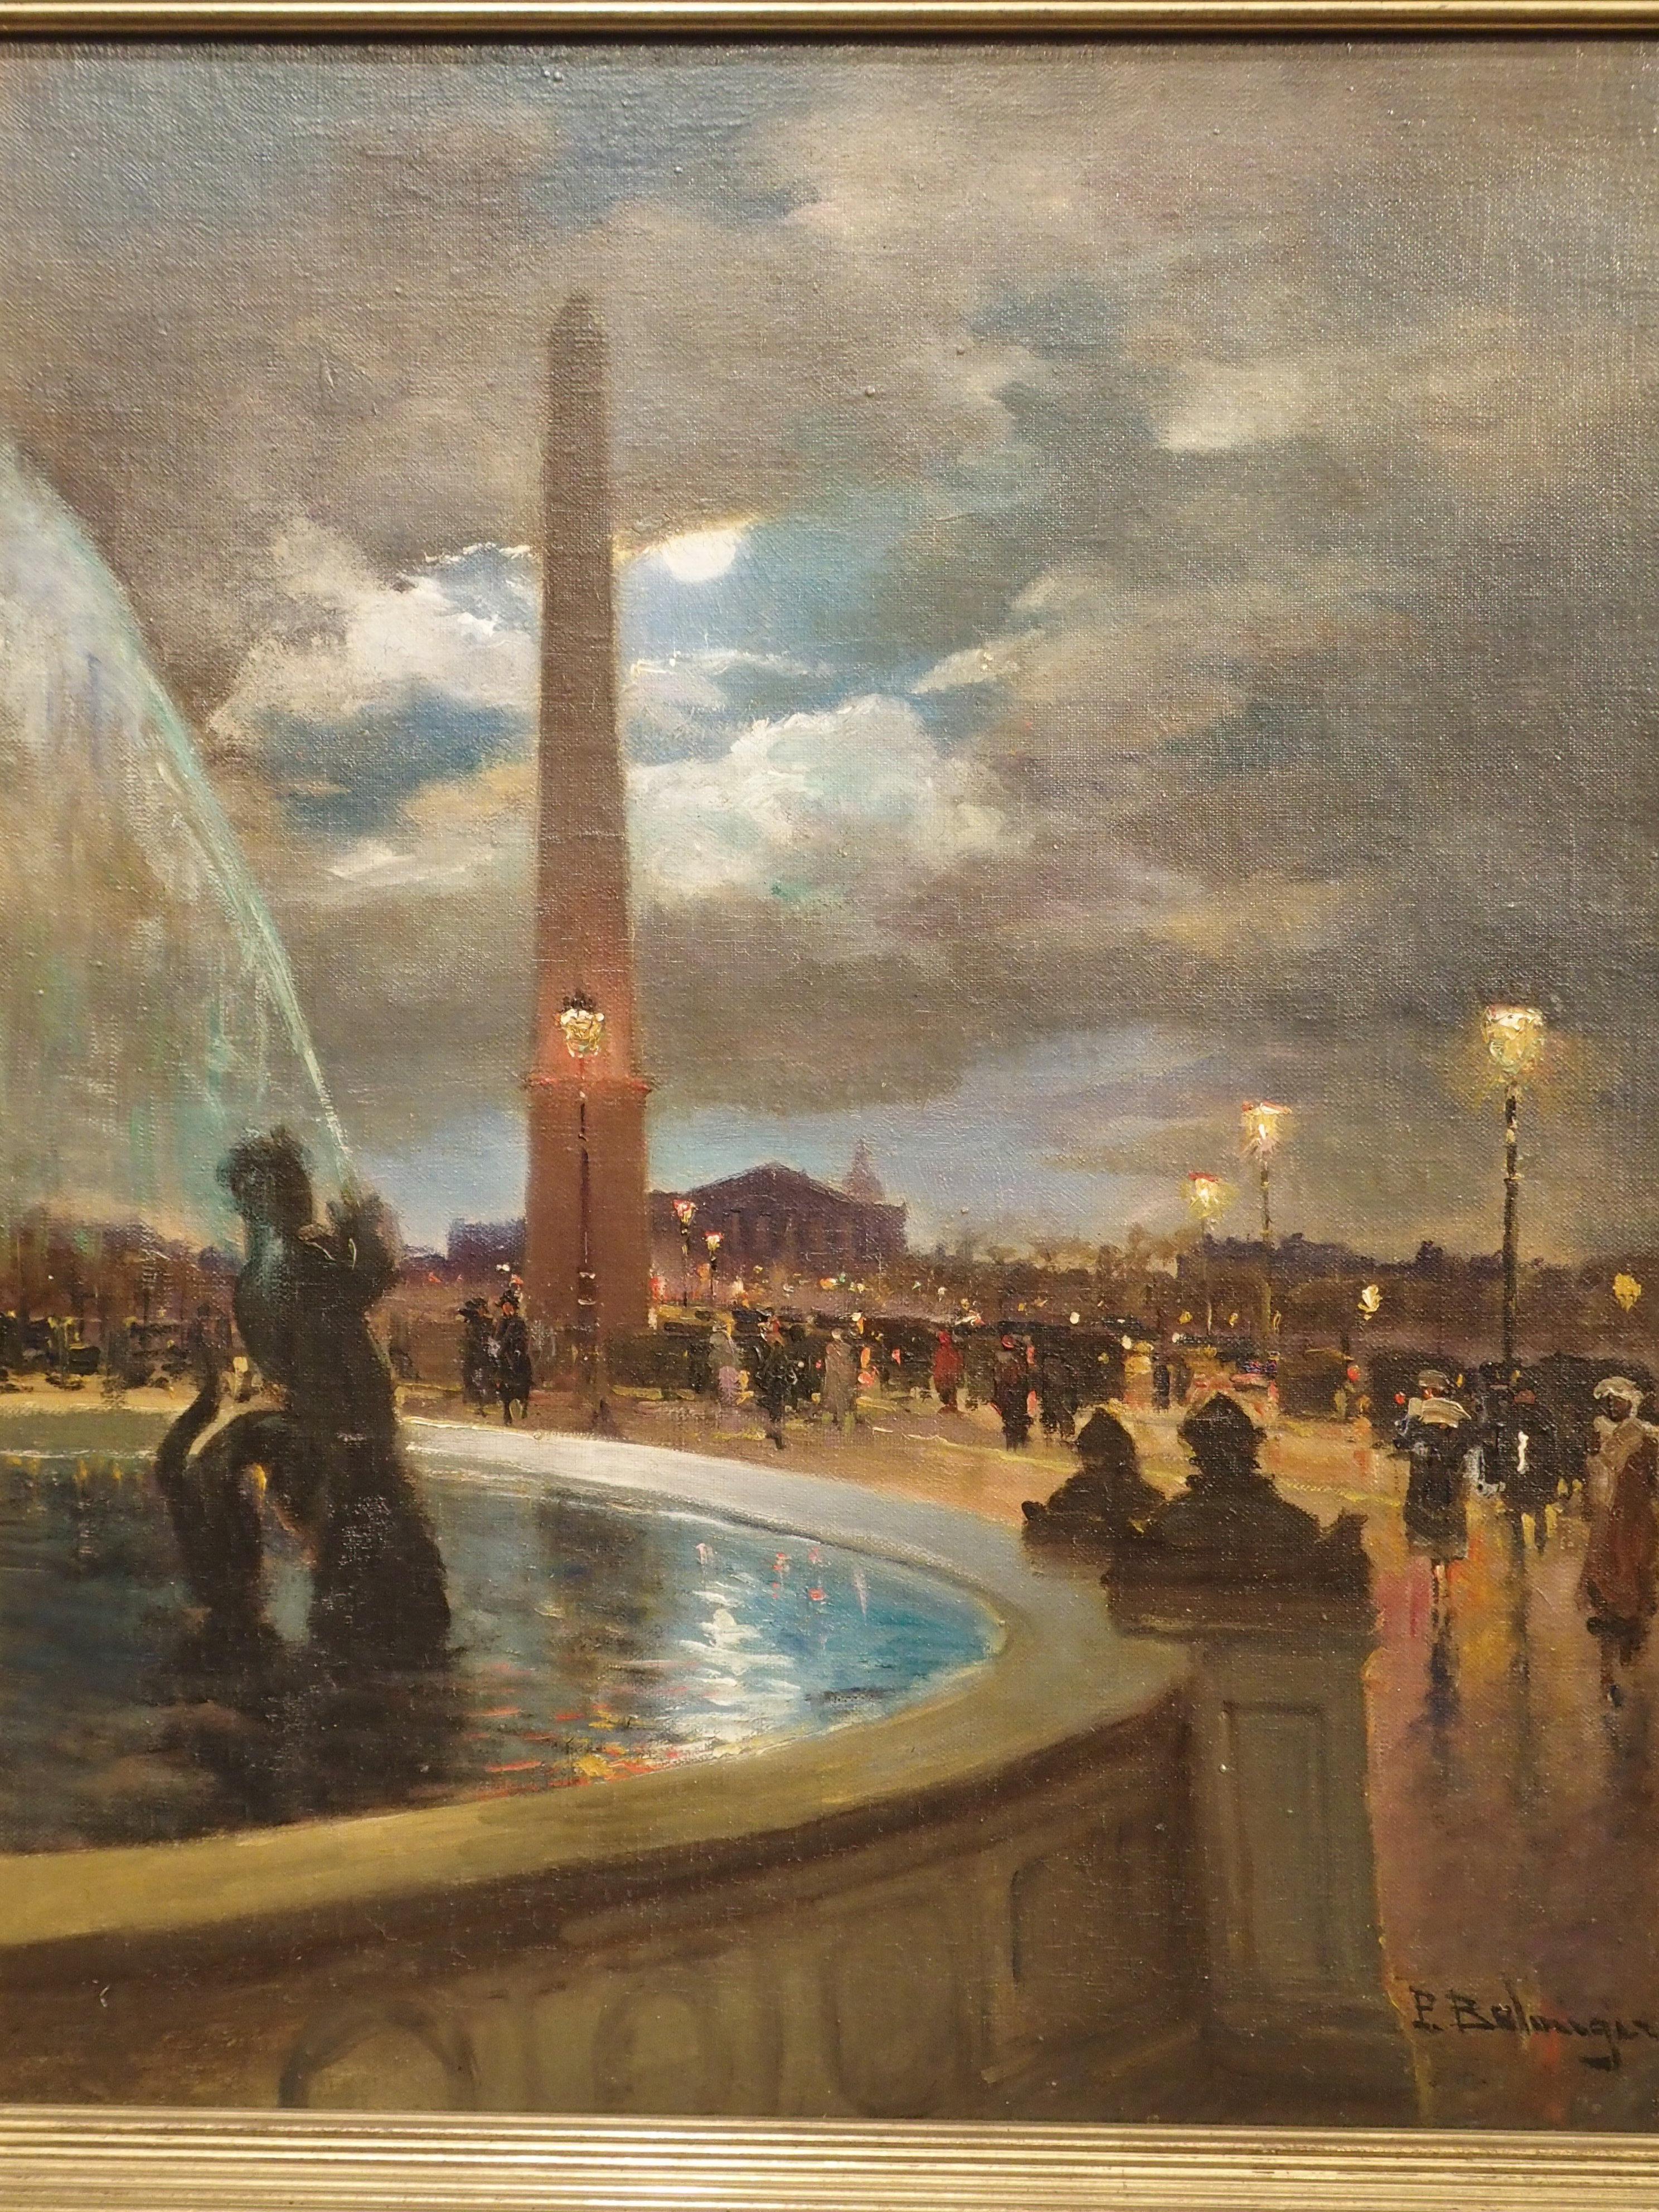 This oil on canvas painting depicts the famous La Place de la Concorde in Paris. It is by the French painter, Paul Balmigere (1882-1953), who became known for his Parisian cityscapes as well as rural landscapes. His play on light is particularly